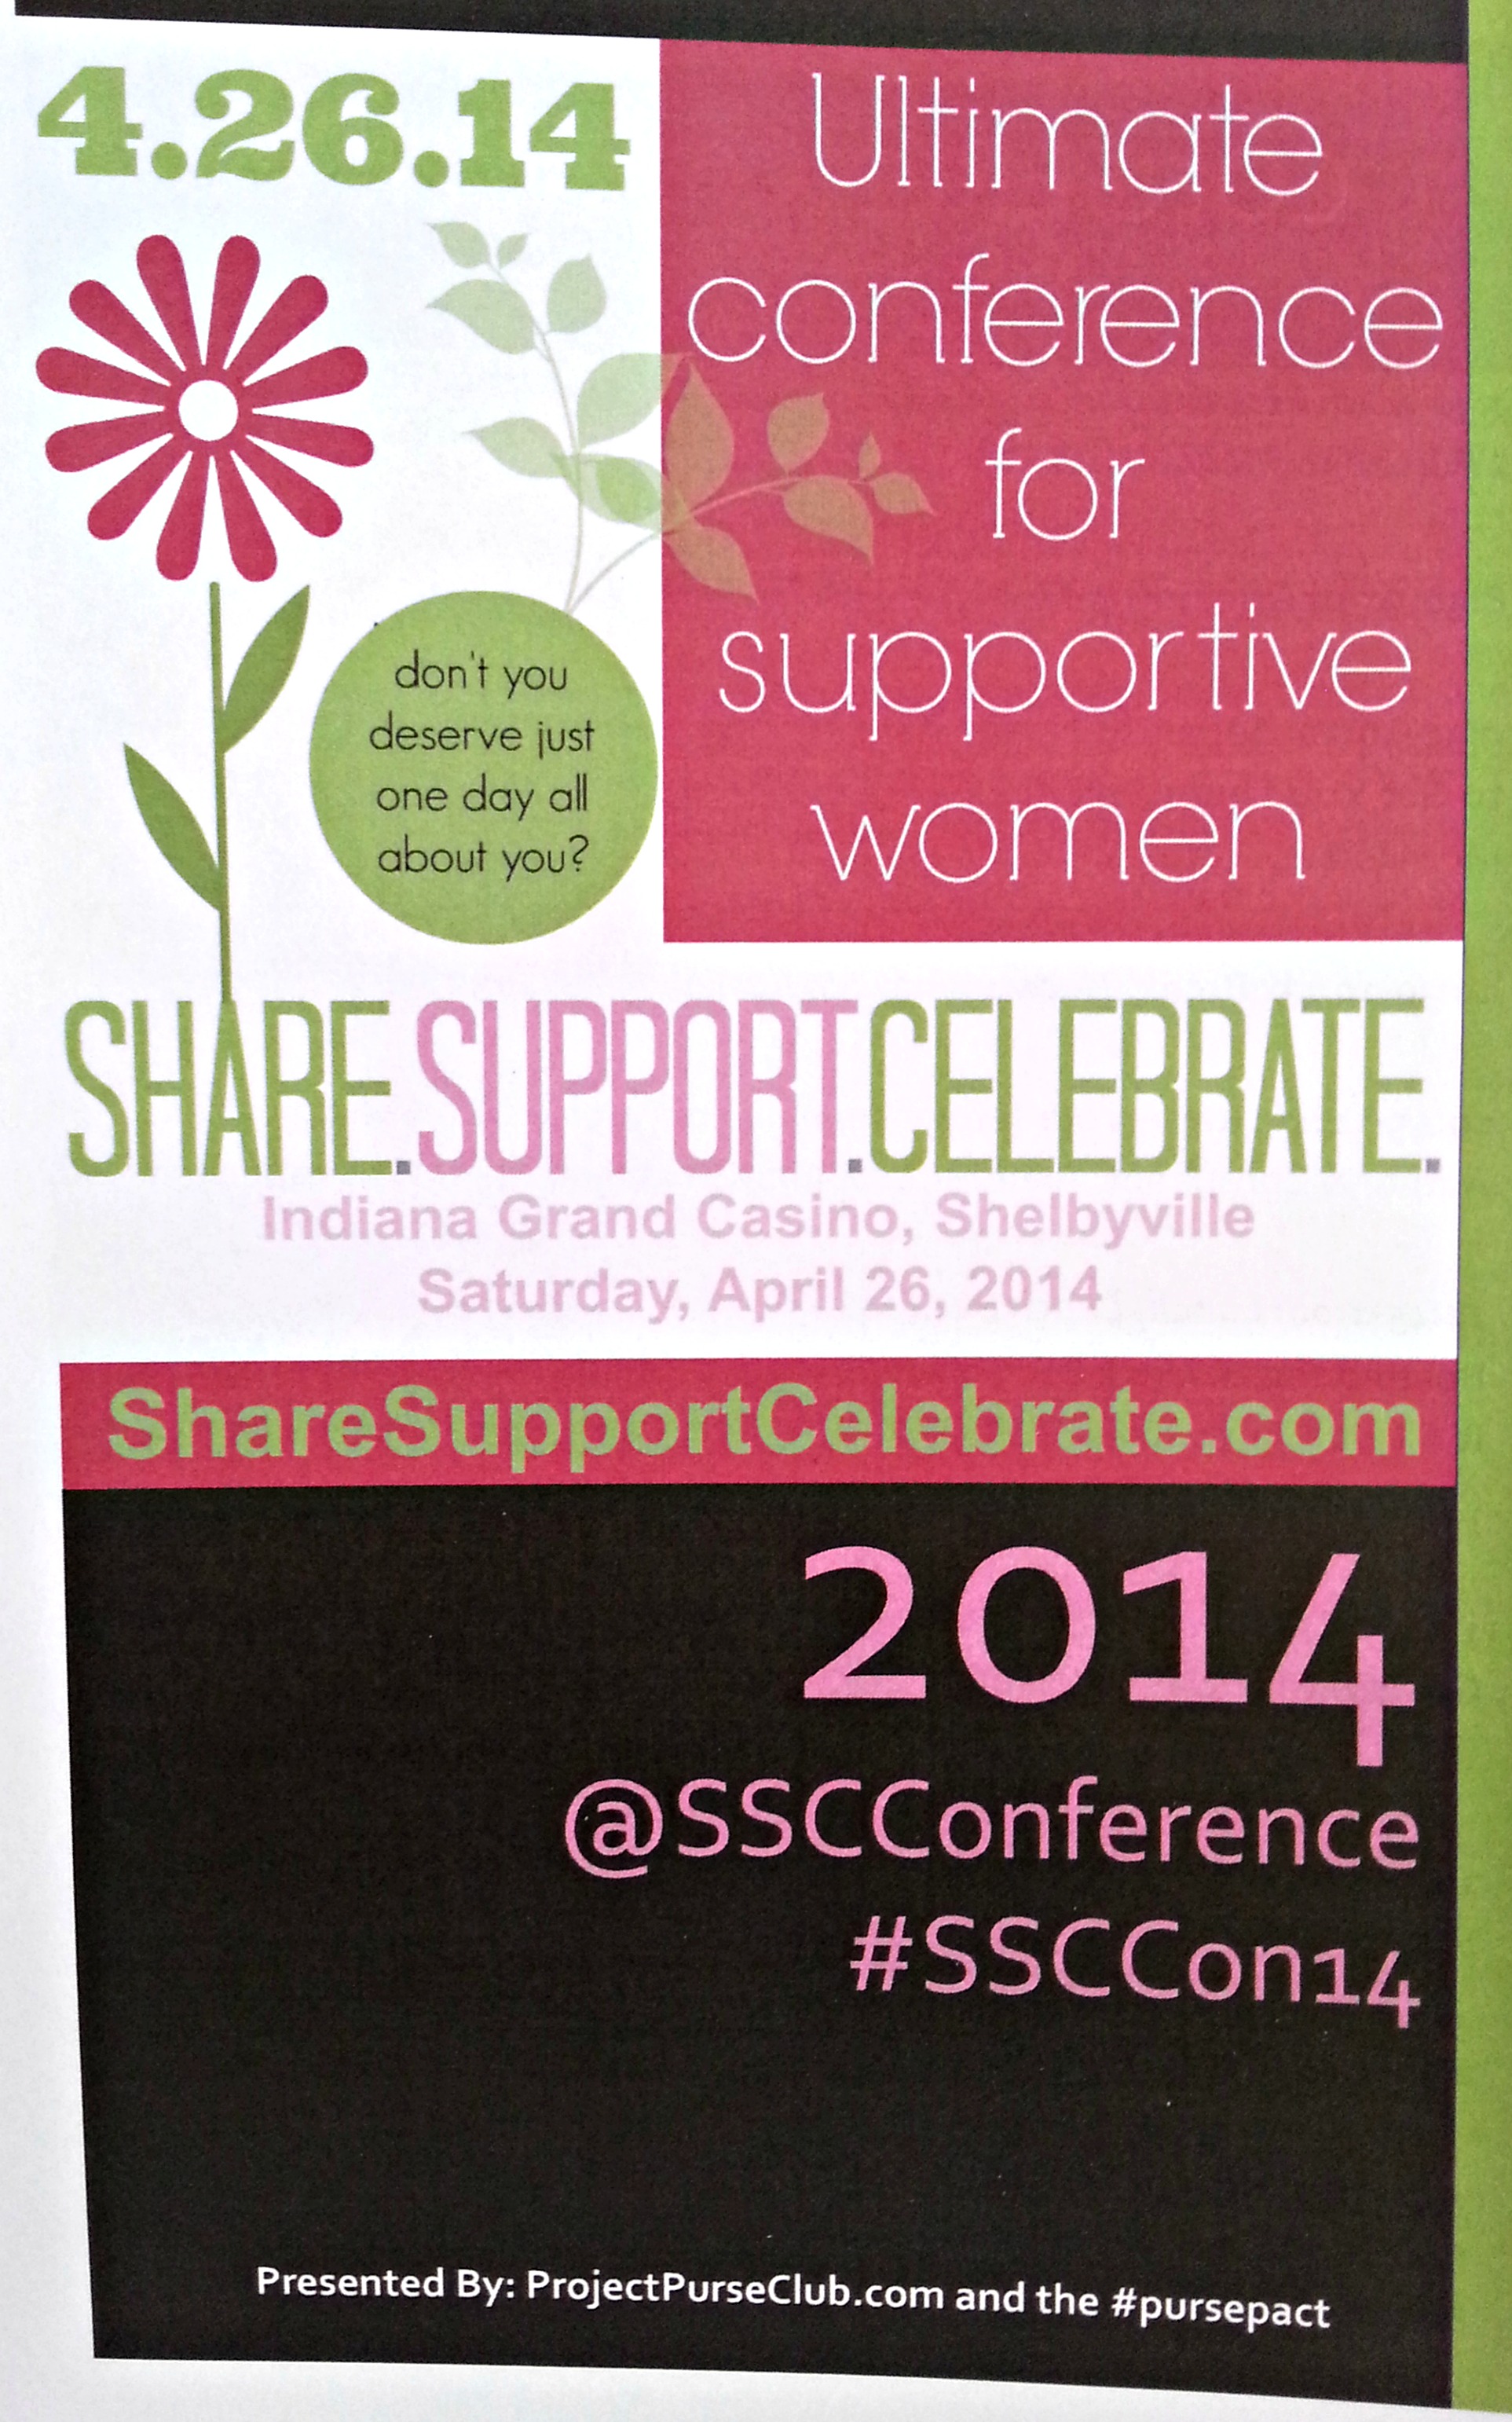 Share.Support.Celebrate Conference